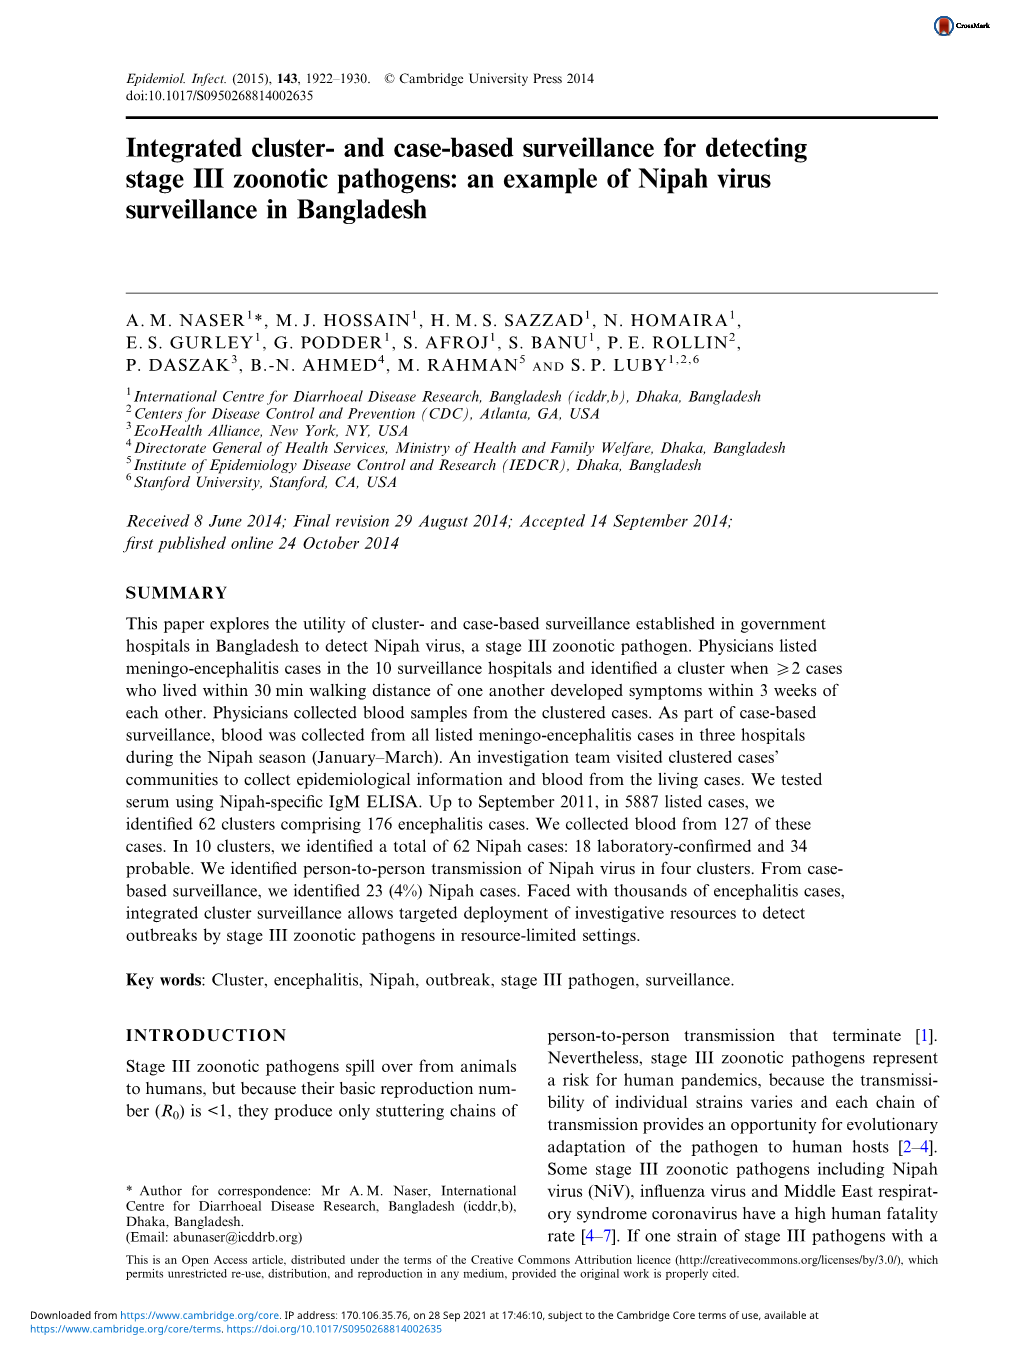 Integrated Cluster- and Case-Based Surveillance for Detecting Stage III Zoonotic Pathogens: an Example of Nipah Virus Surveillance in Bangladesh